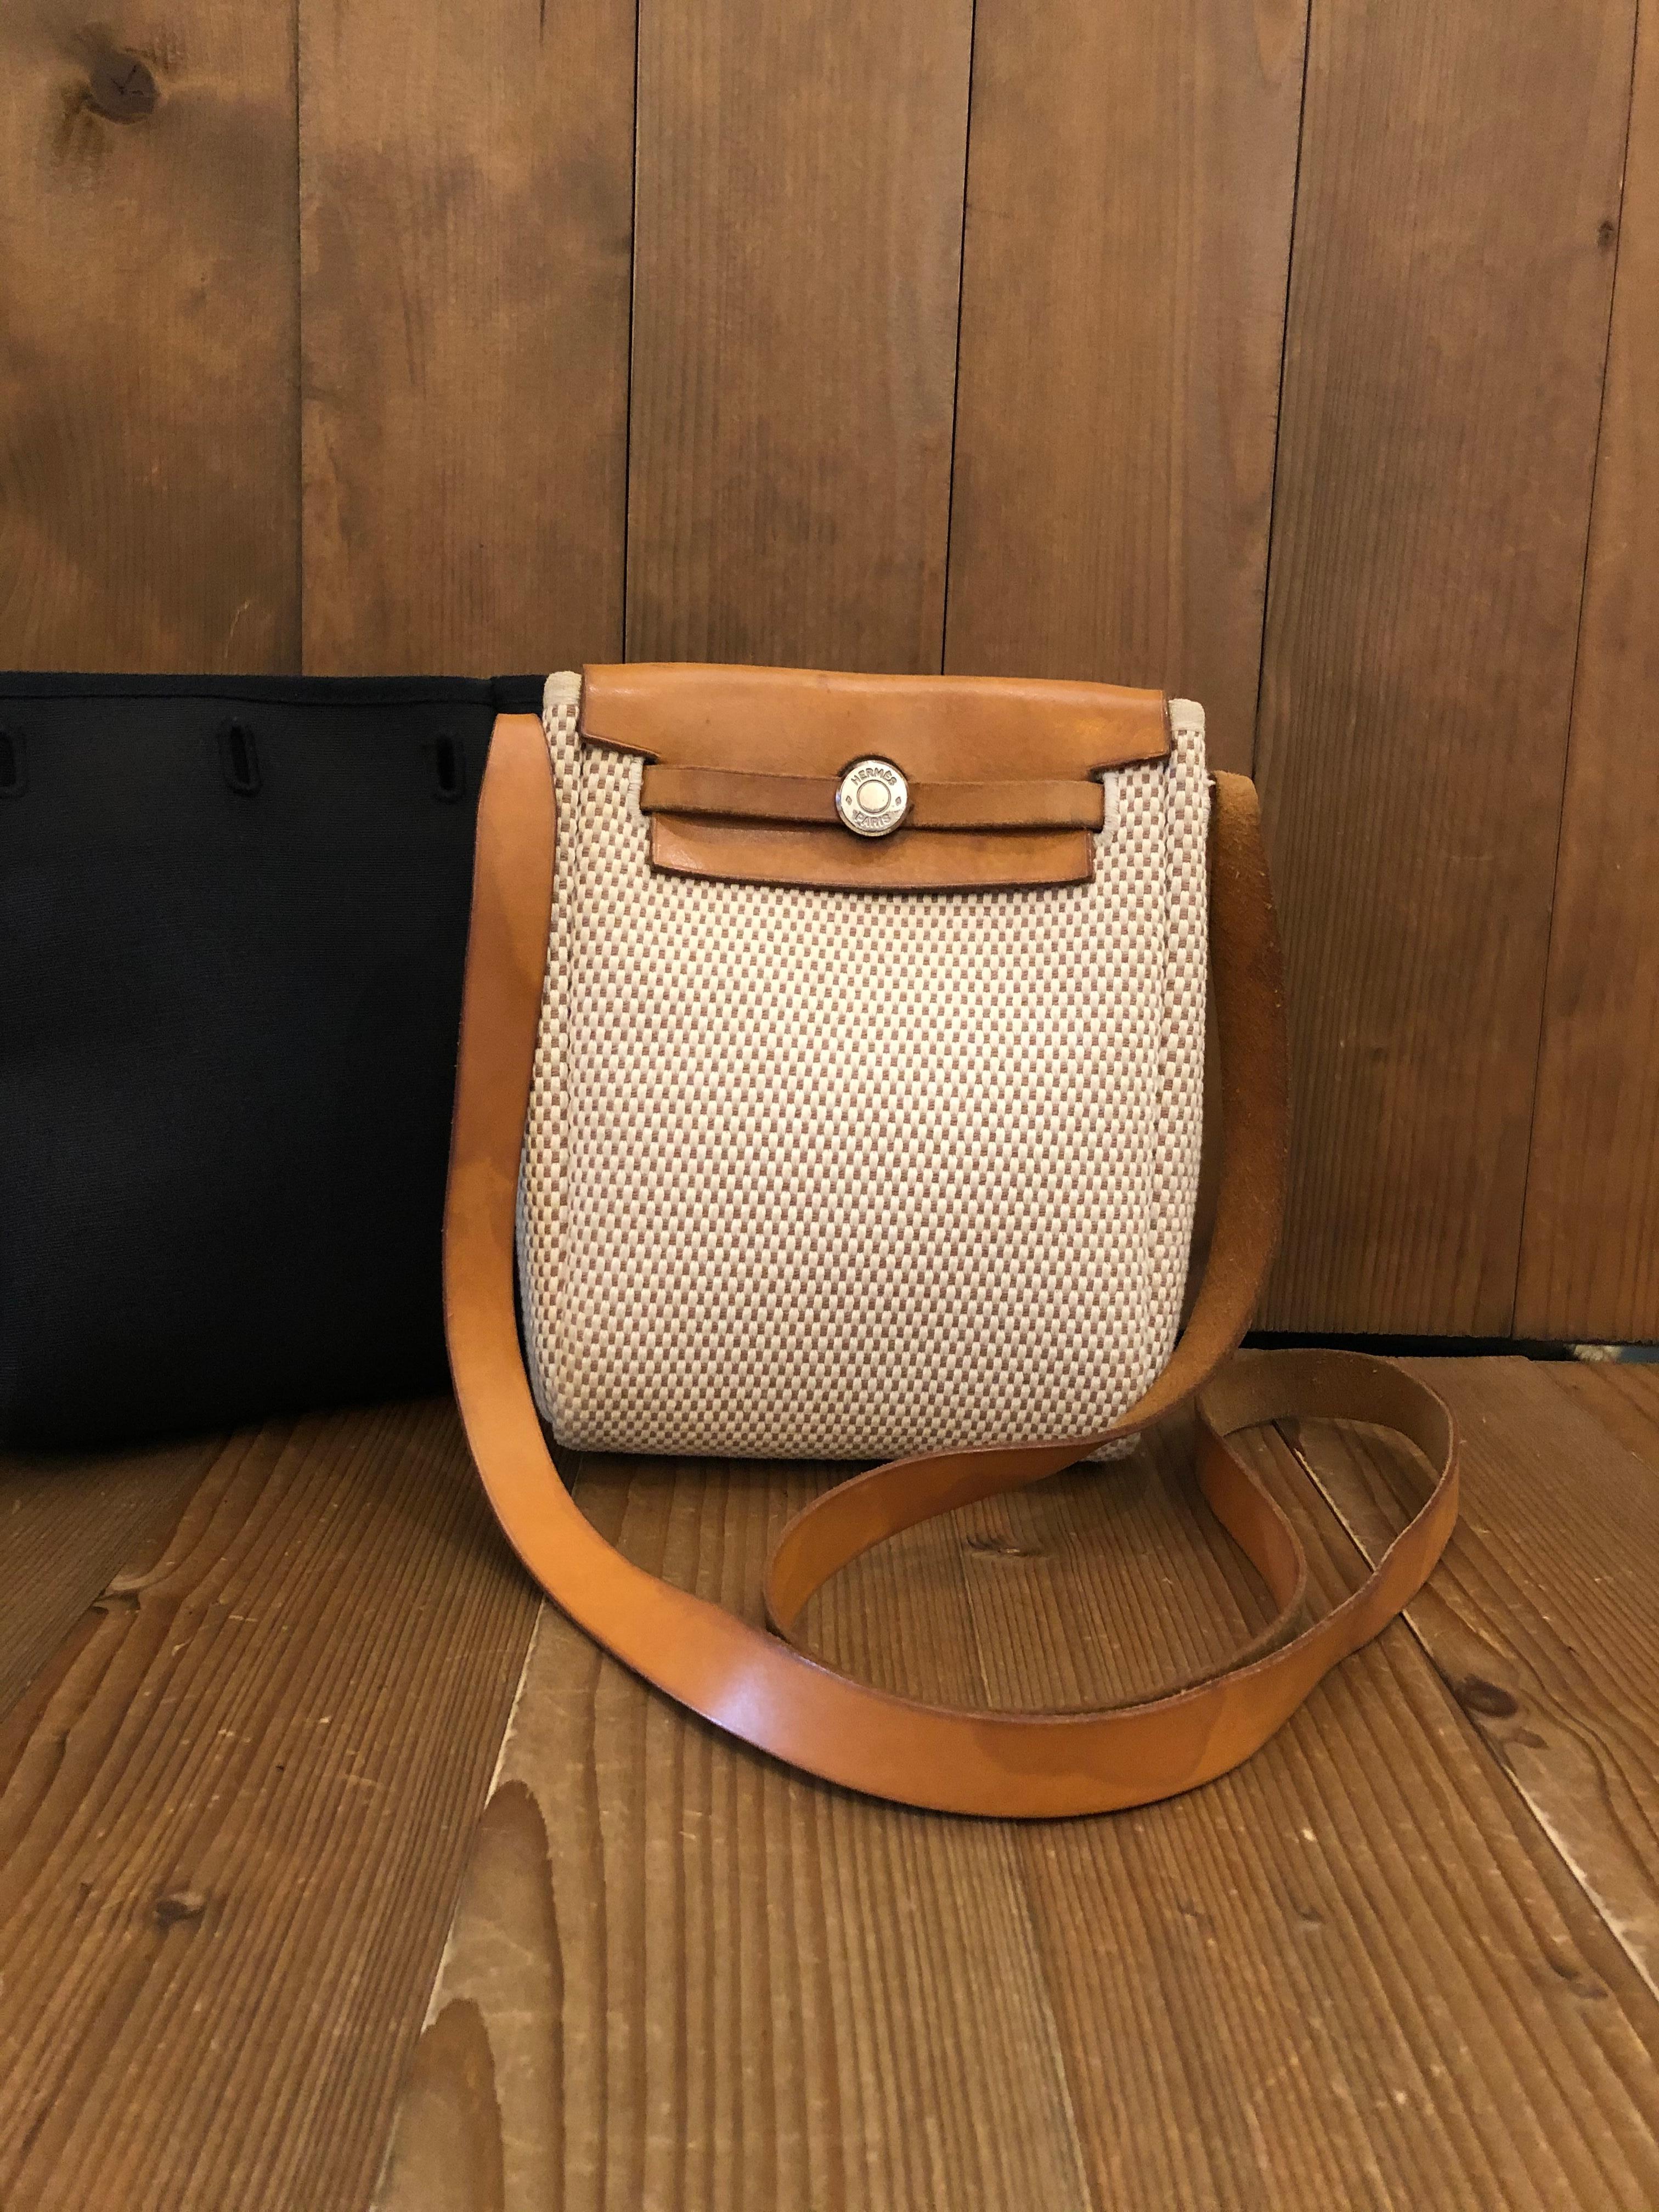 This is an authentic HERMES Herbag Toile PM natural and black crossbody bag. This compact two in one crossbody bag is crafted of cotton canvas (black and natural beige) and natural cowhide leather. The top crown alternates between bases of natural